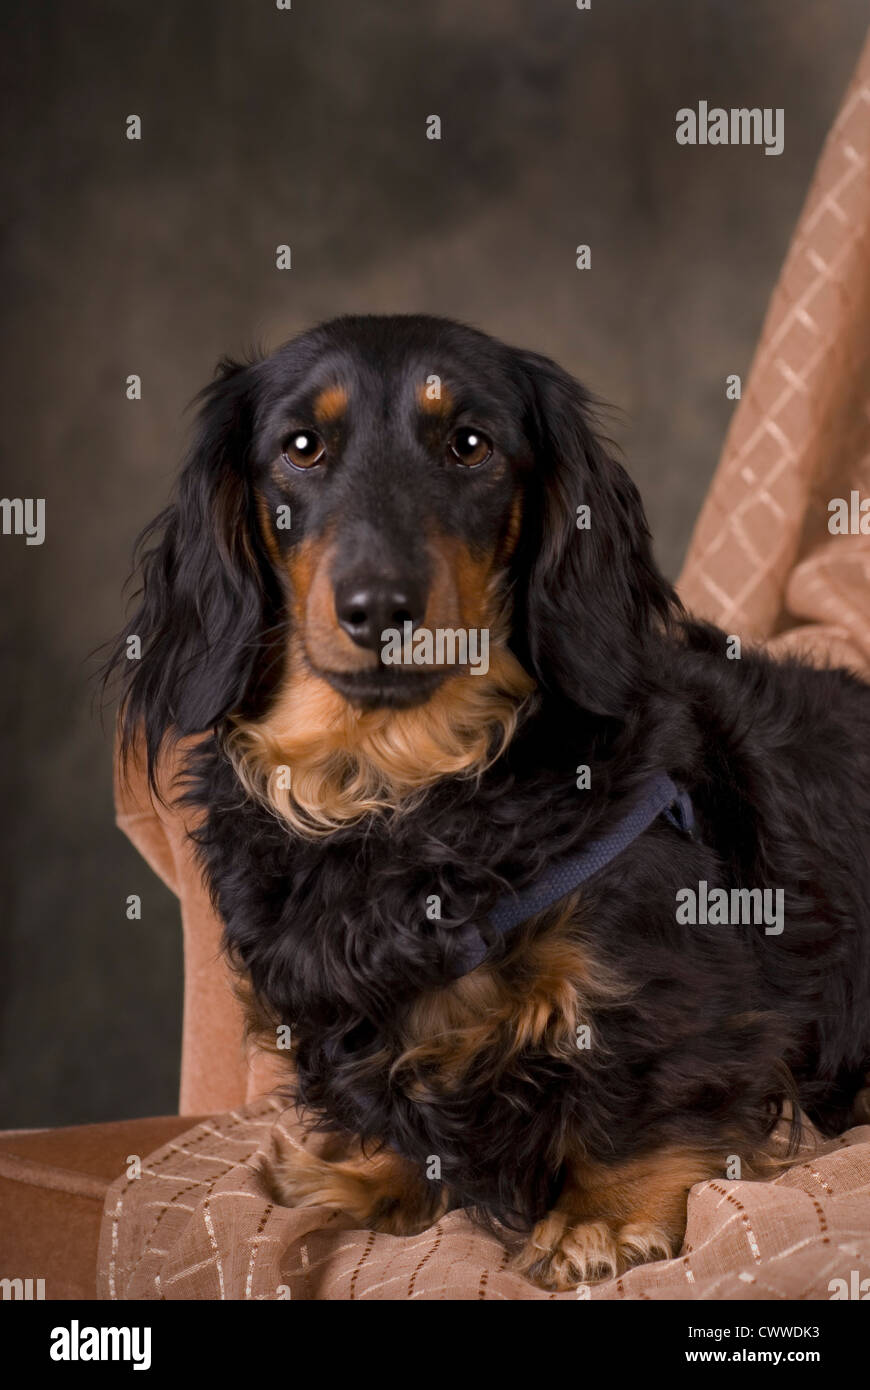 Vertical studio shot of a long-haired black and tan Dachshund looking into the camera. Stock Photo